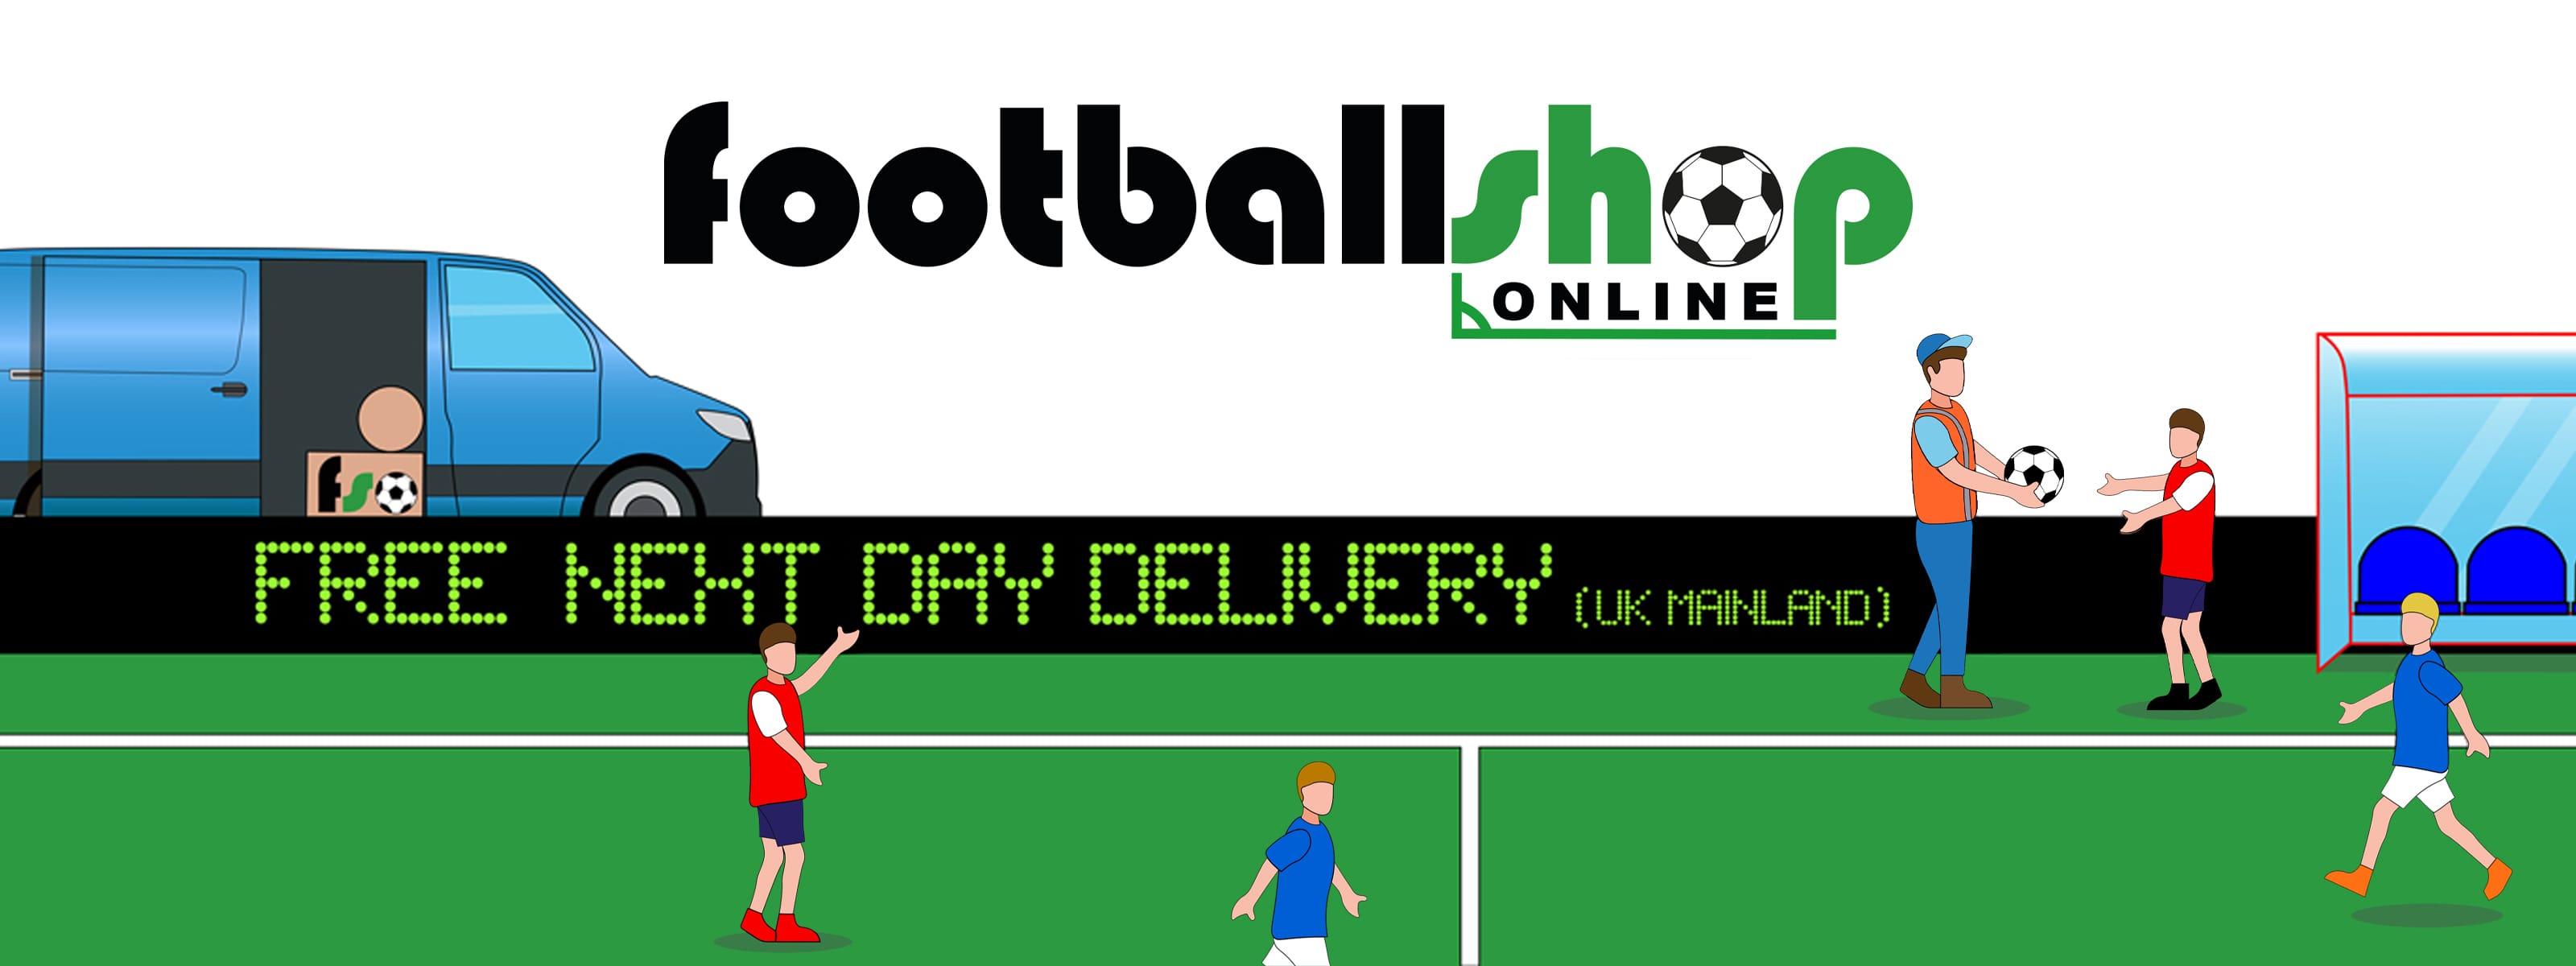 Free next day delivery